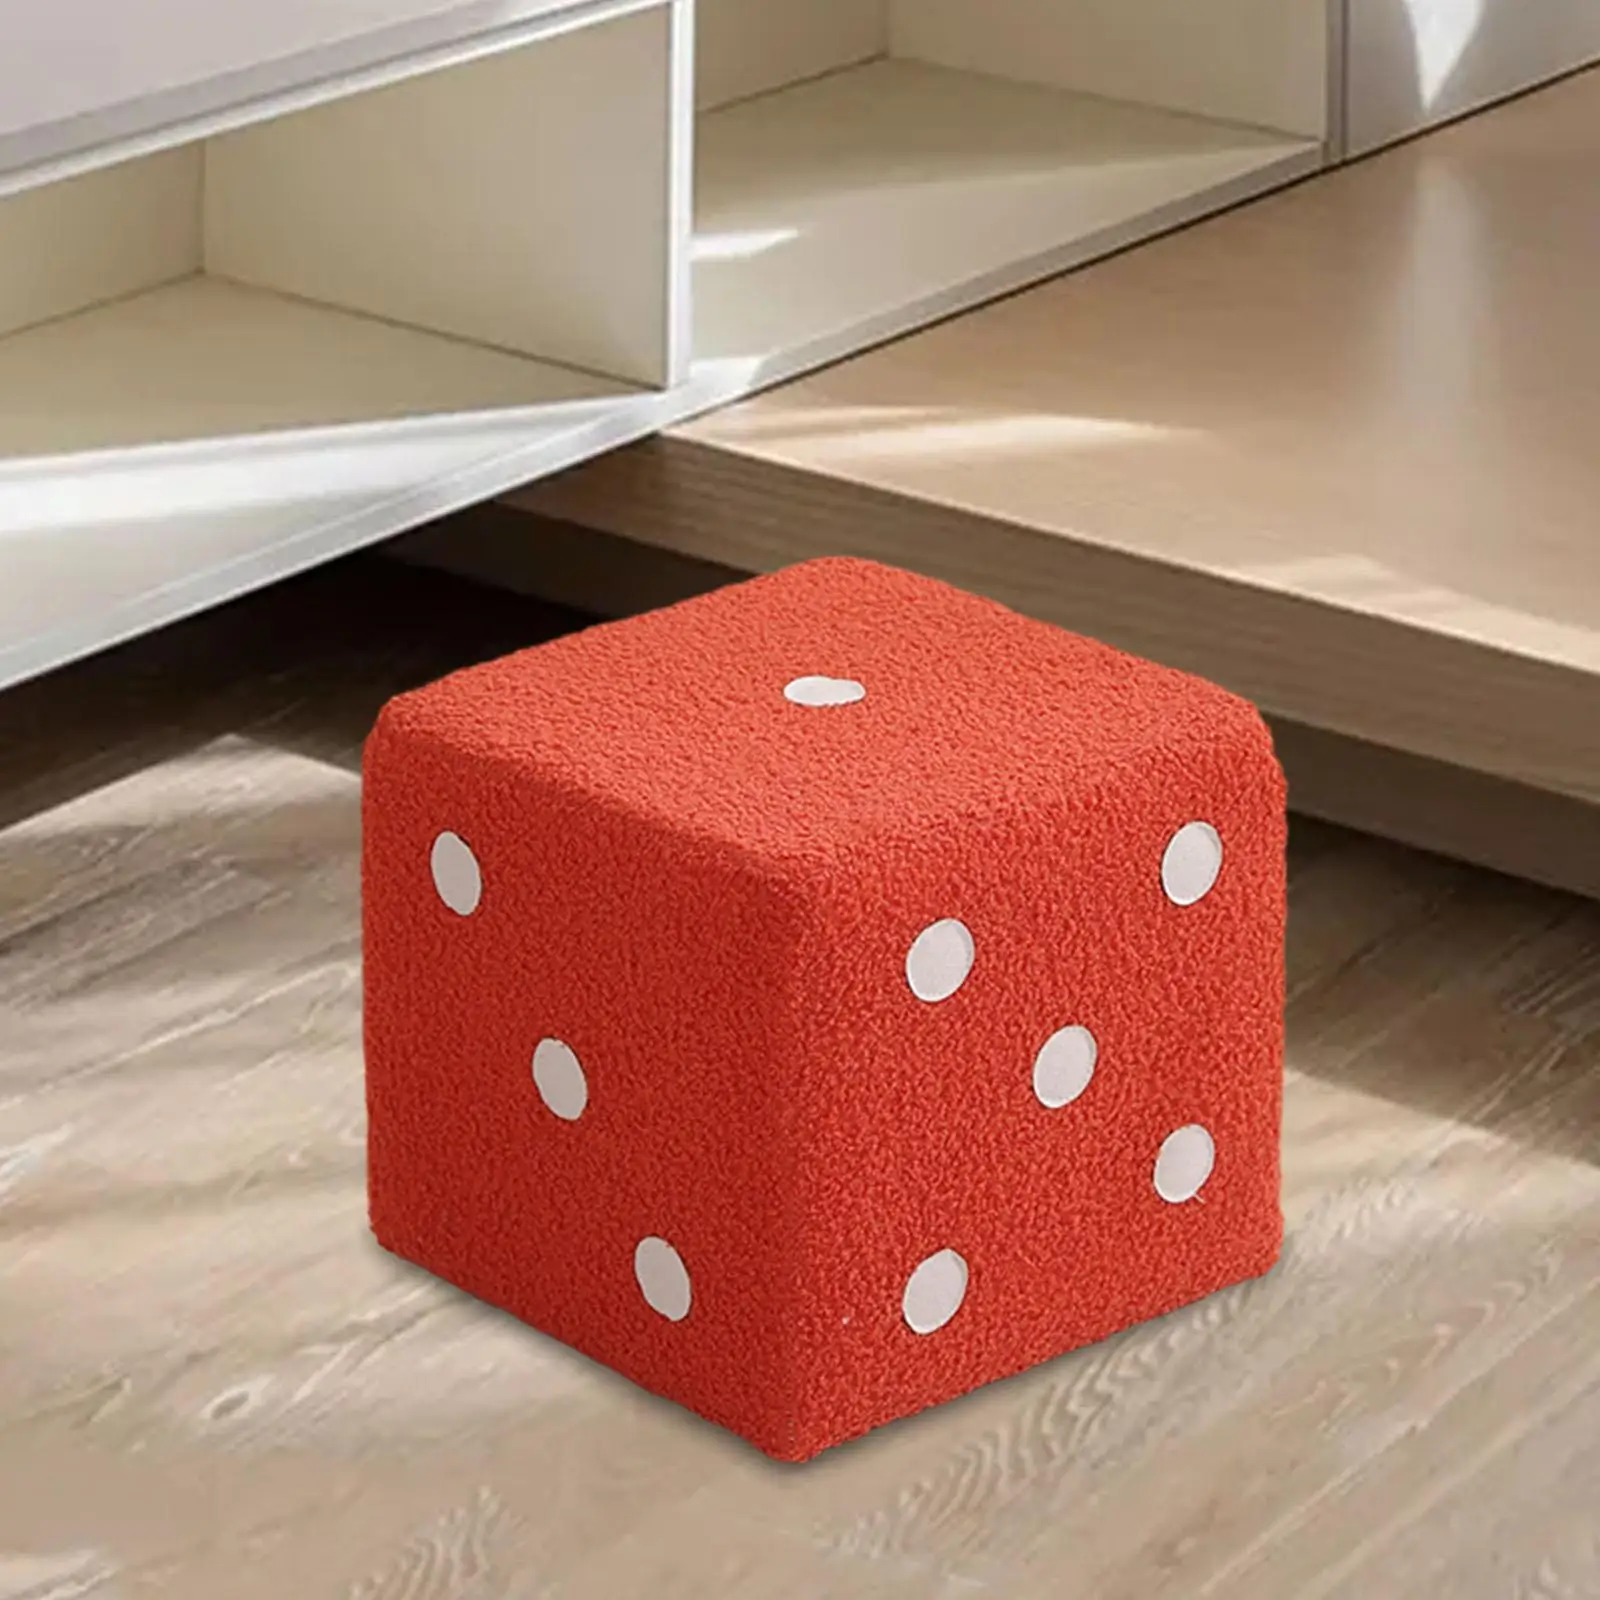 Dice Cubic Foot Stool Stable Kids Seat Ottoman Dice Cube Ottoman Change Shoe Stool for Entryway Playroom Doorway Bedroom Bedside